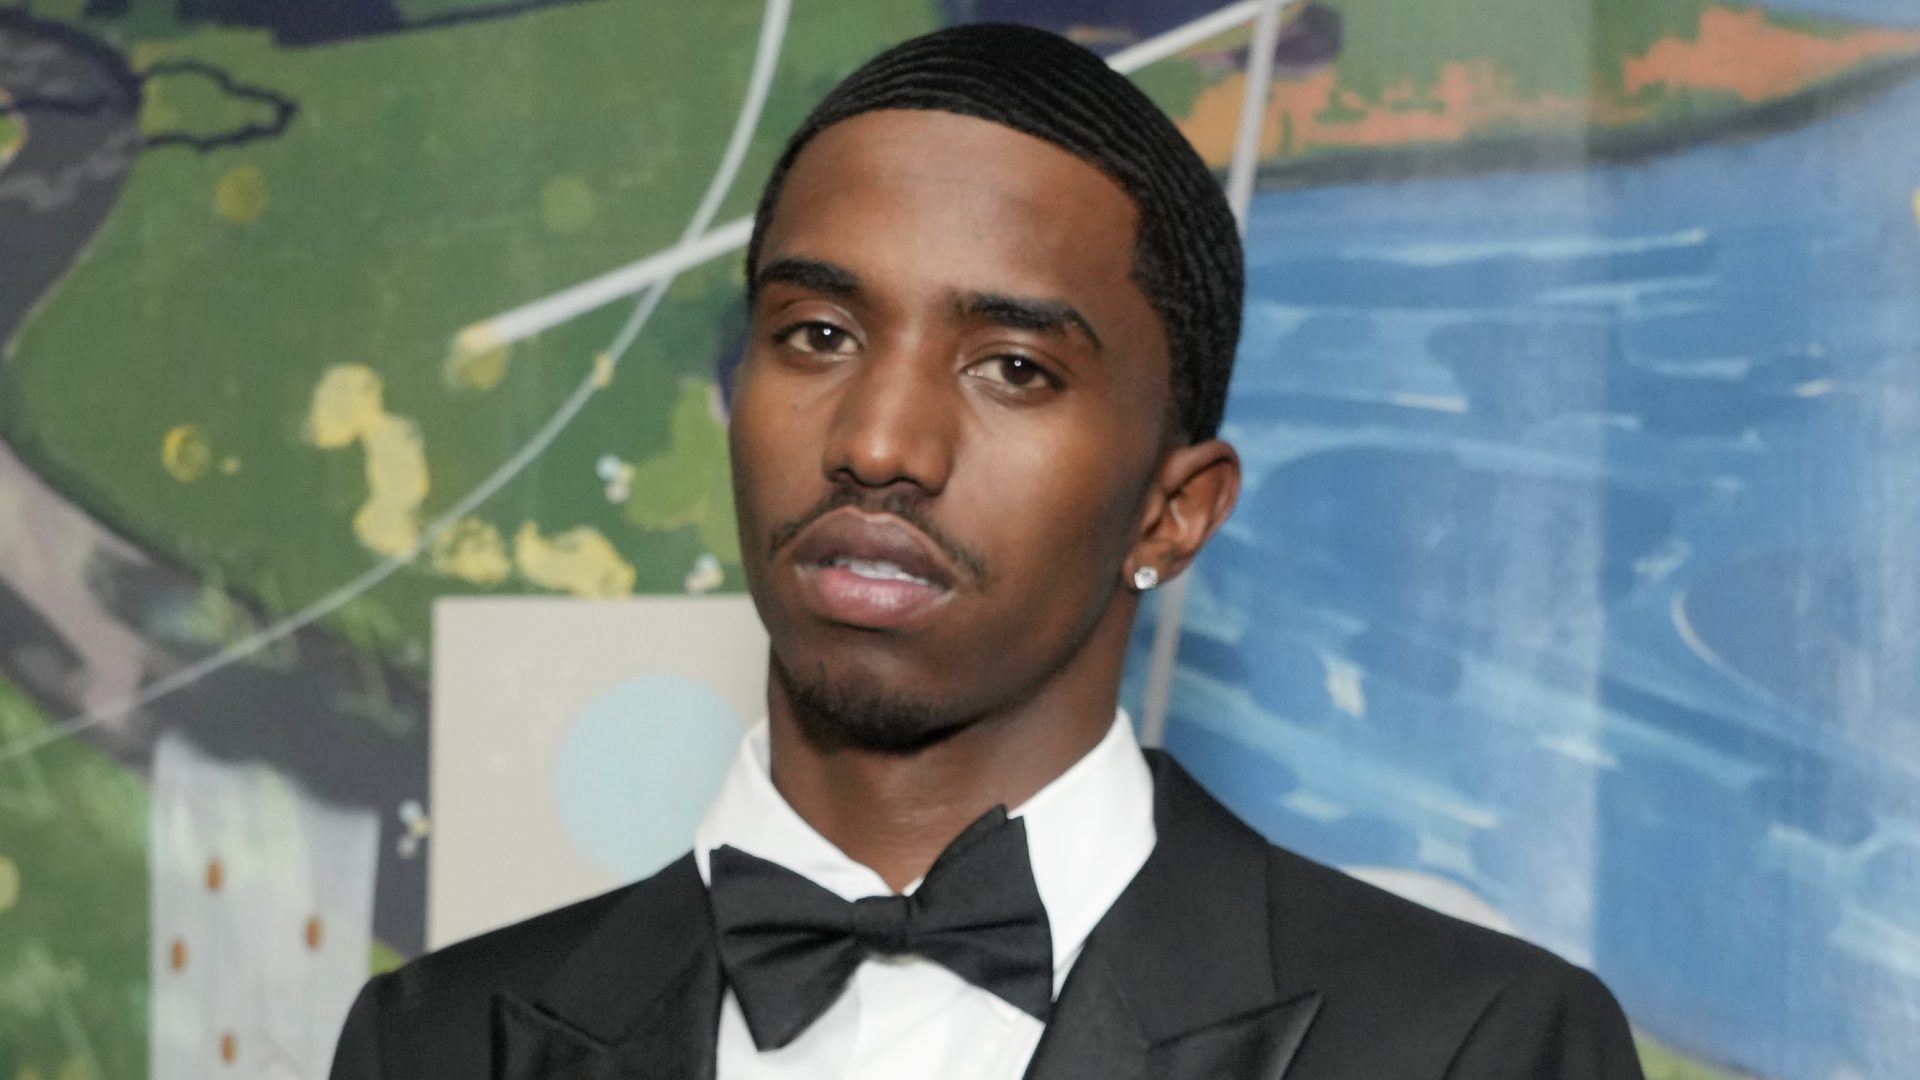 Christian Combs’ Lawyer Releases Statement After He’s Accused Of Sexual Assault In Recently Filed Lawsuit